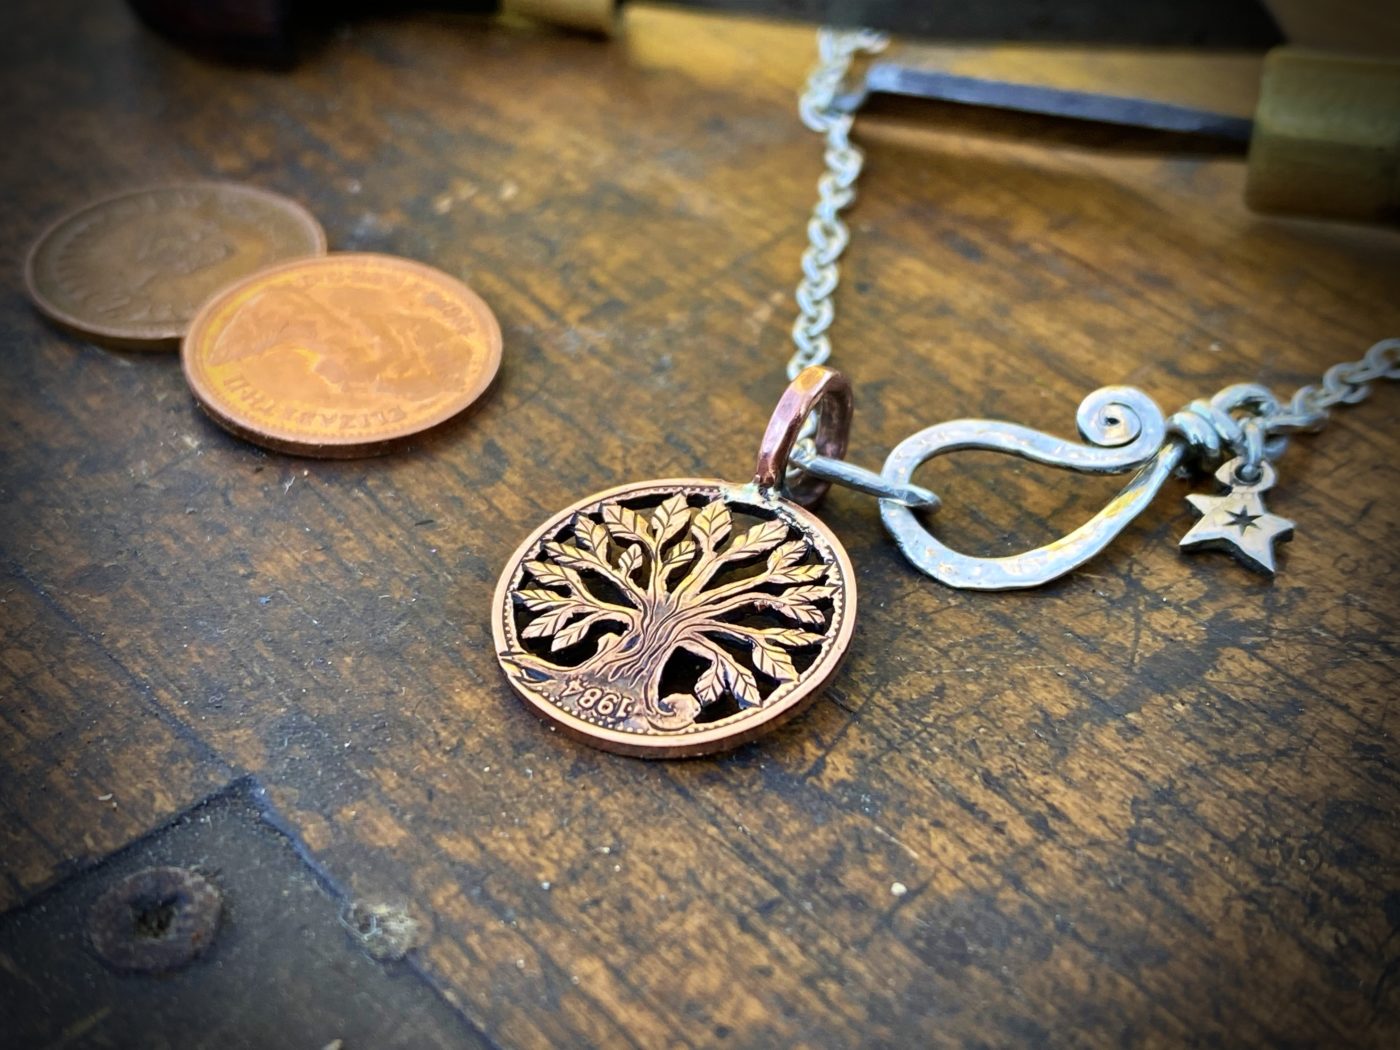 40th birthday gift tree of life made from repurposed half penny coin